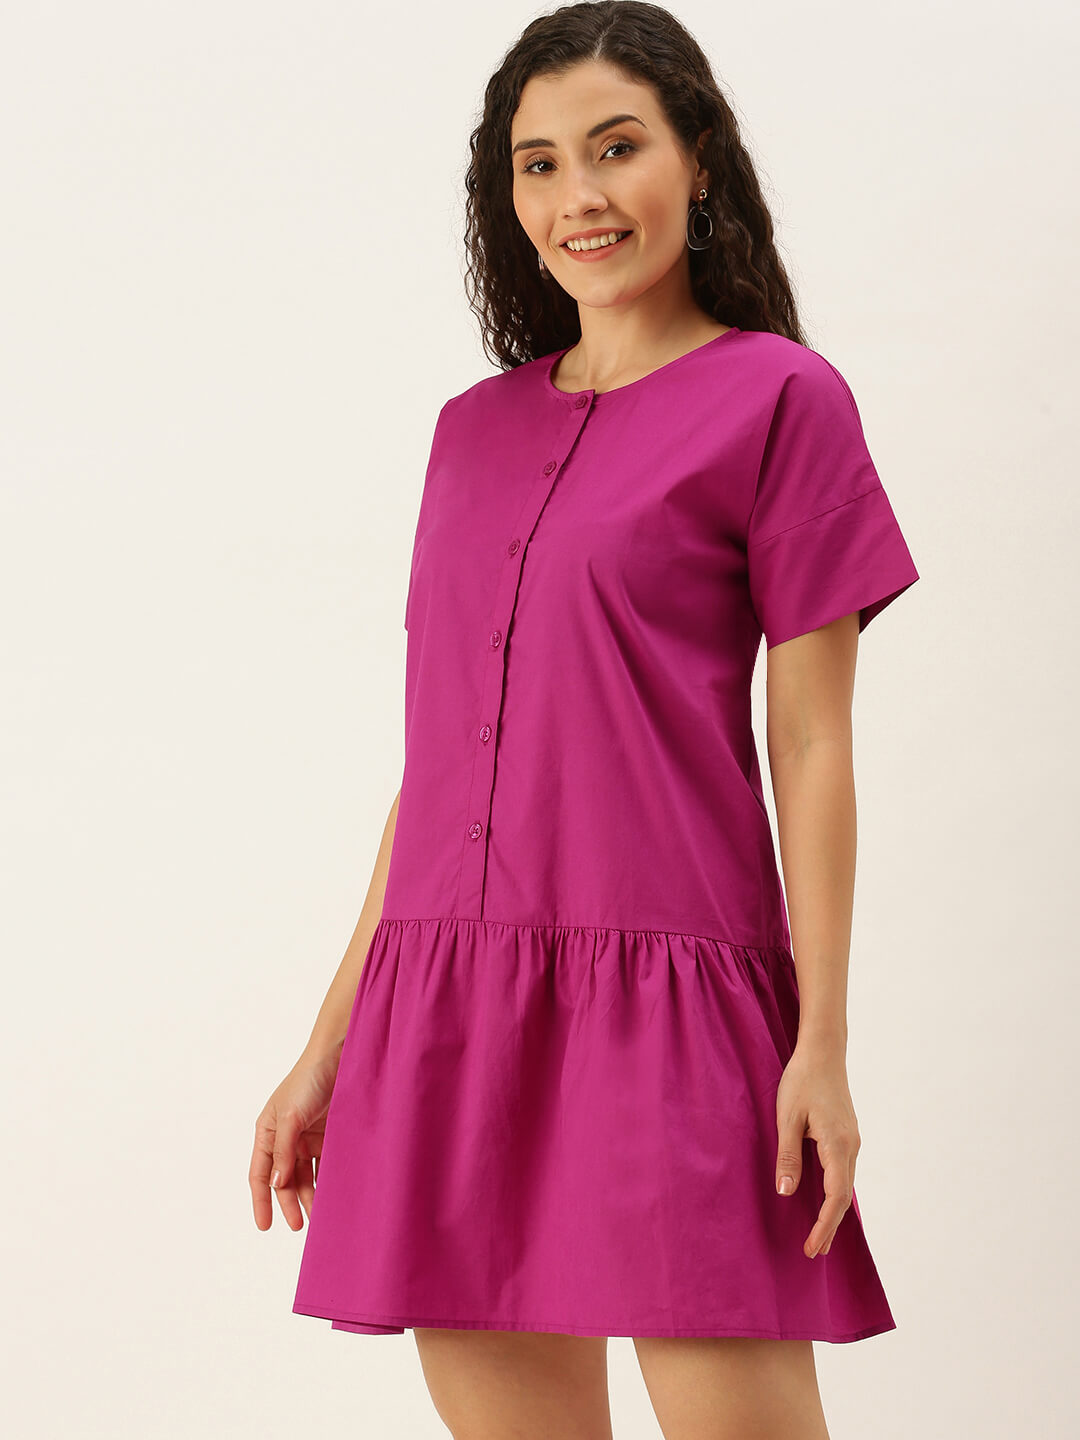 Eco Women's Front Button With Waist Gathers Short Dress